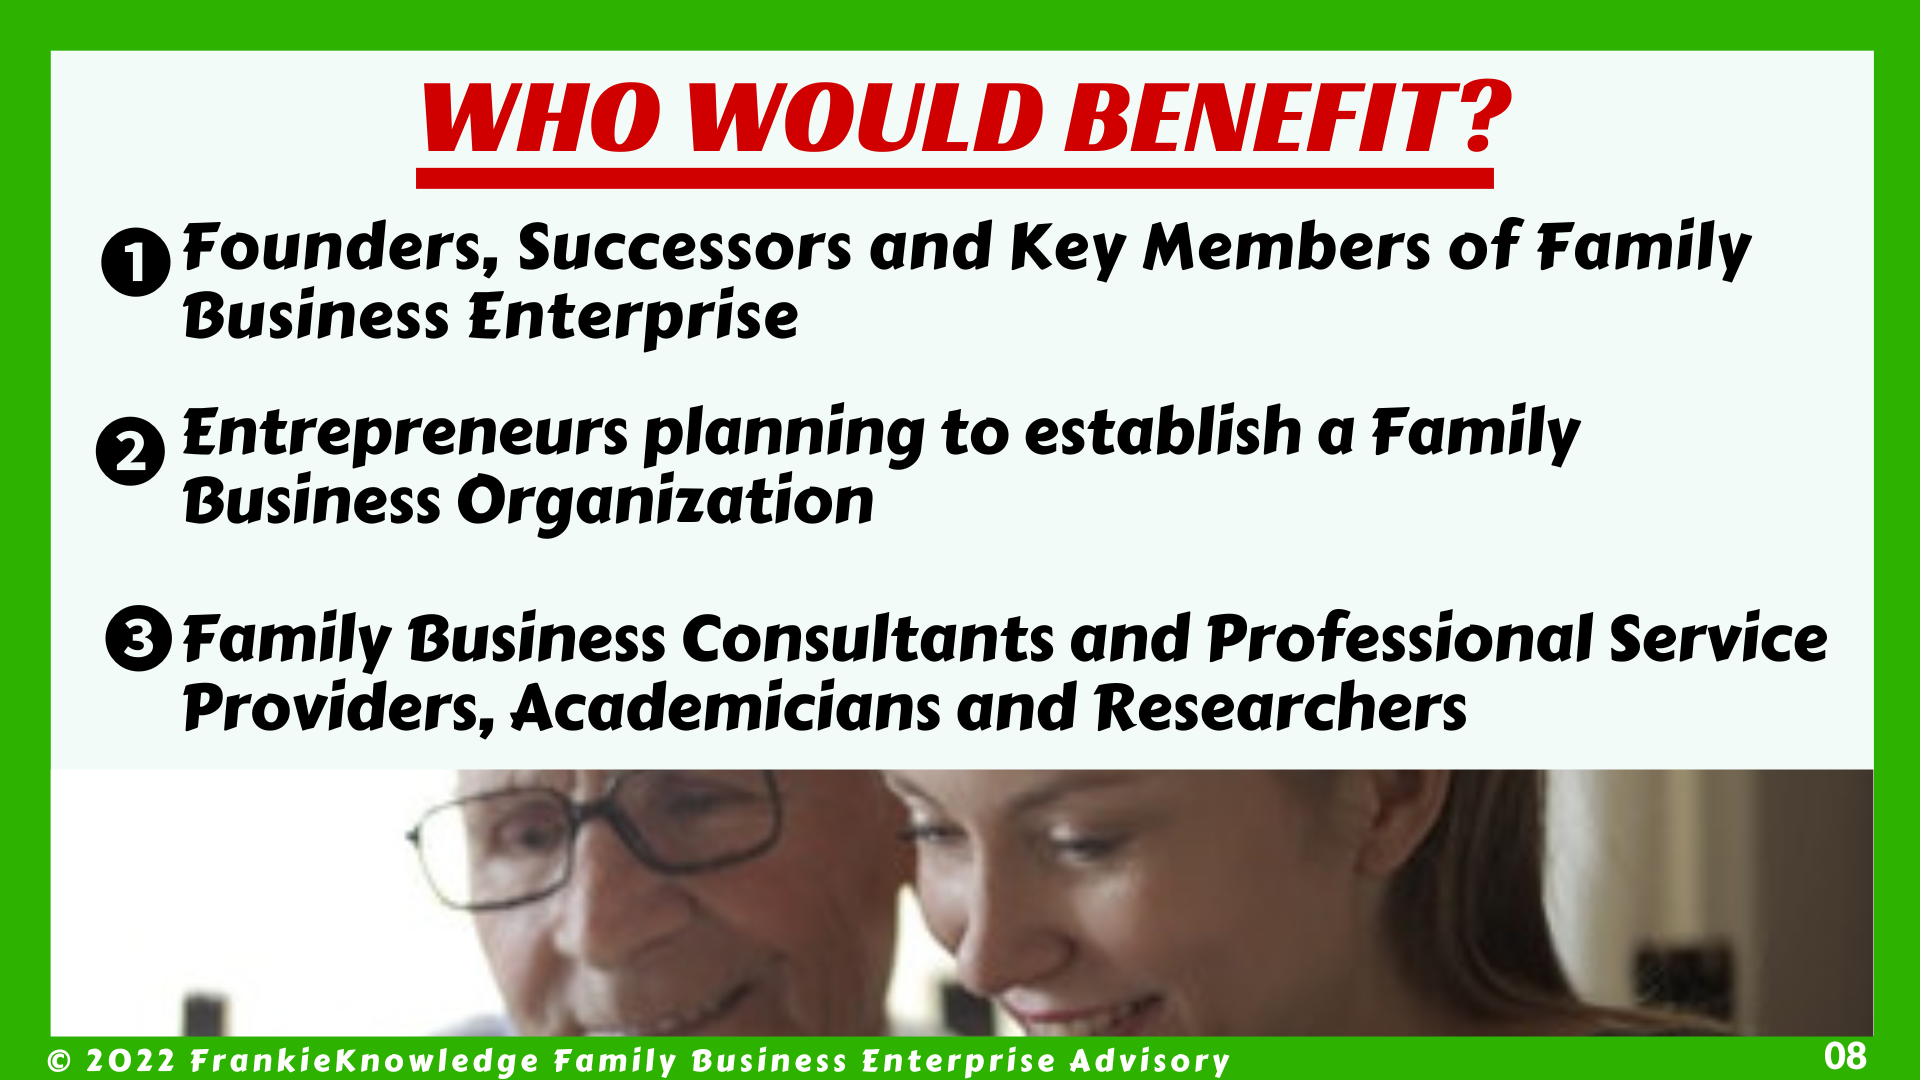 FrankieKnowledge Premium Video will benefit  (1) The Founders, Successors and Key Members of Family Business Enterprise (2) Entrepreneurs planning to establish a Family Business Organization and  (3) Family Business Consultants and Professional Service Providers, Academicians and Researchers 